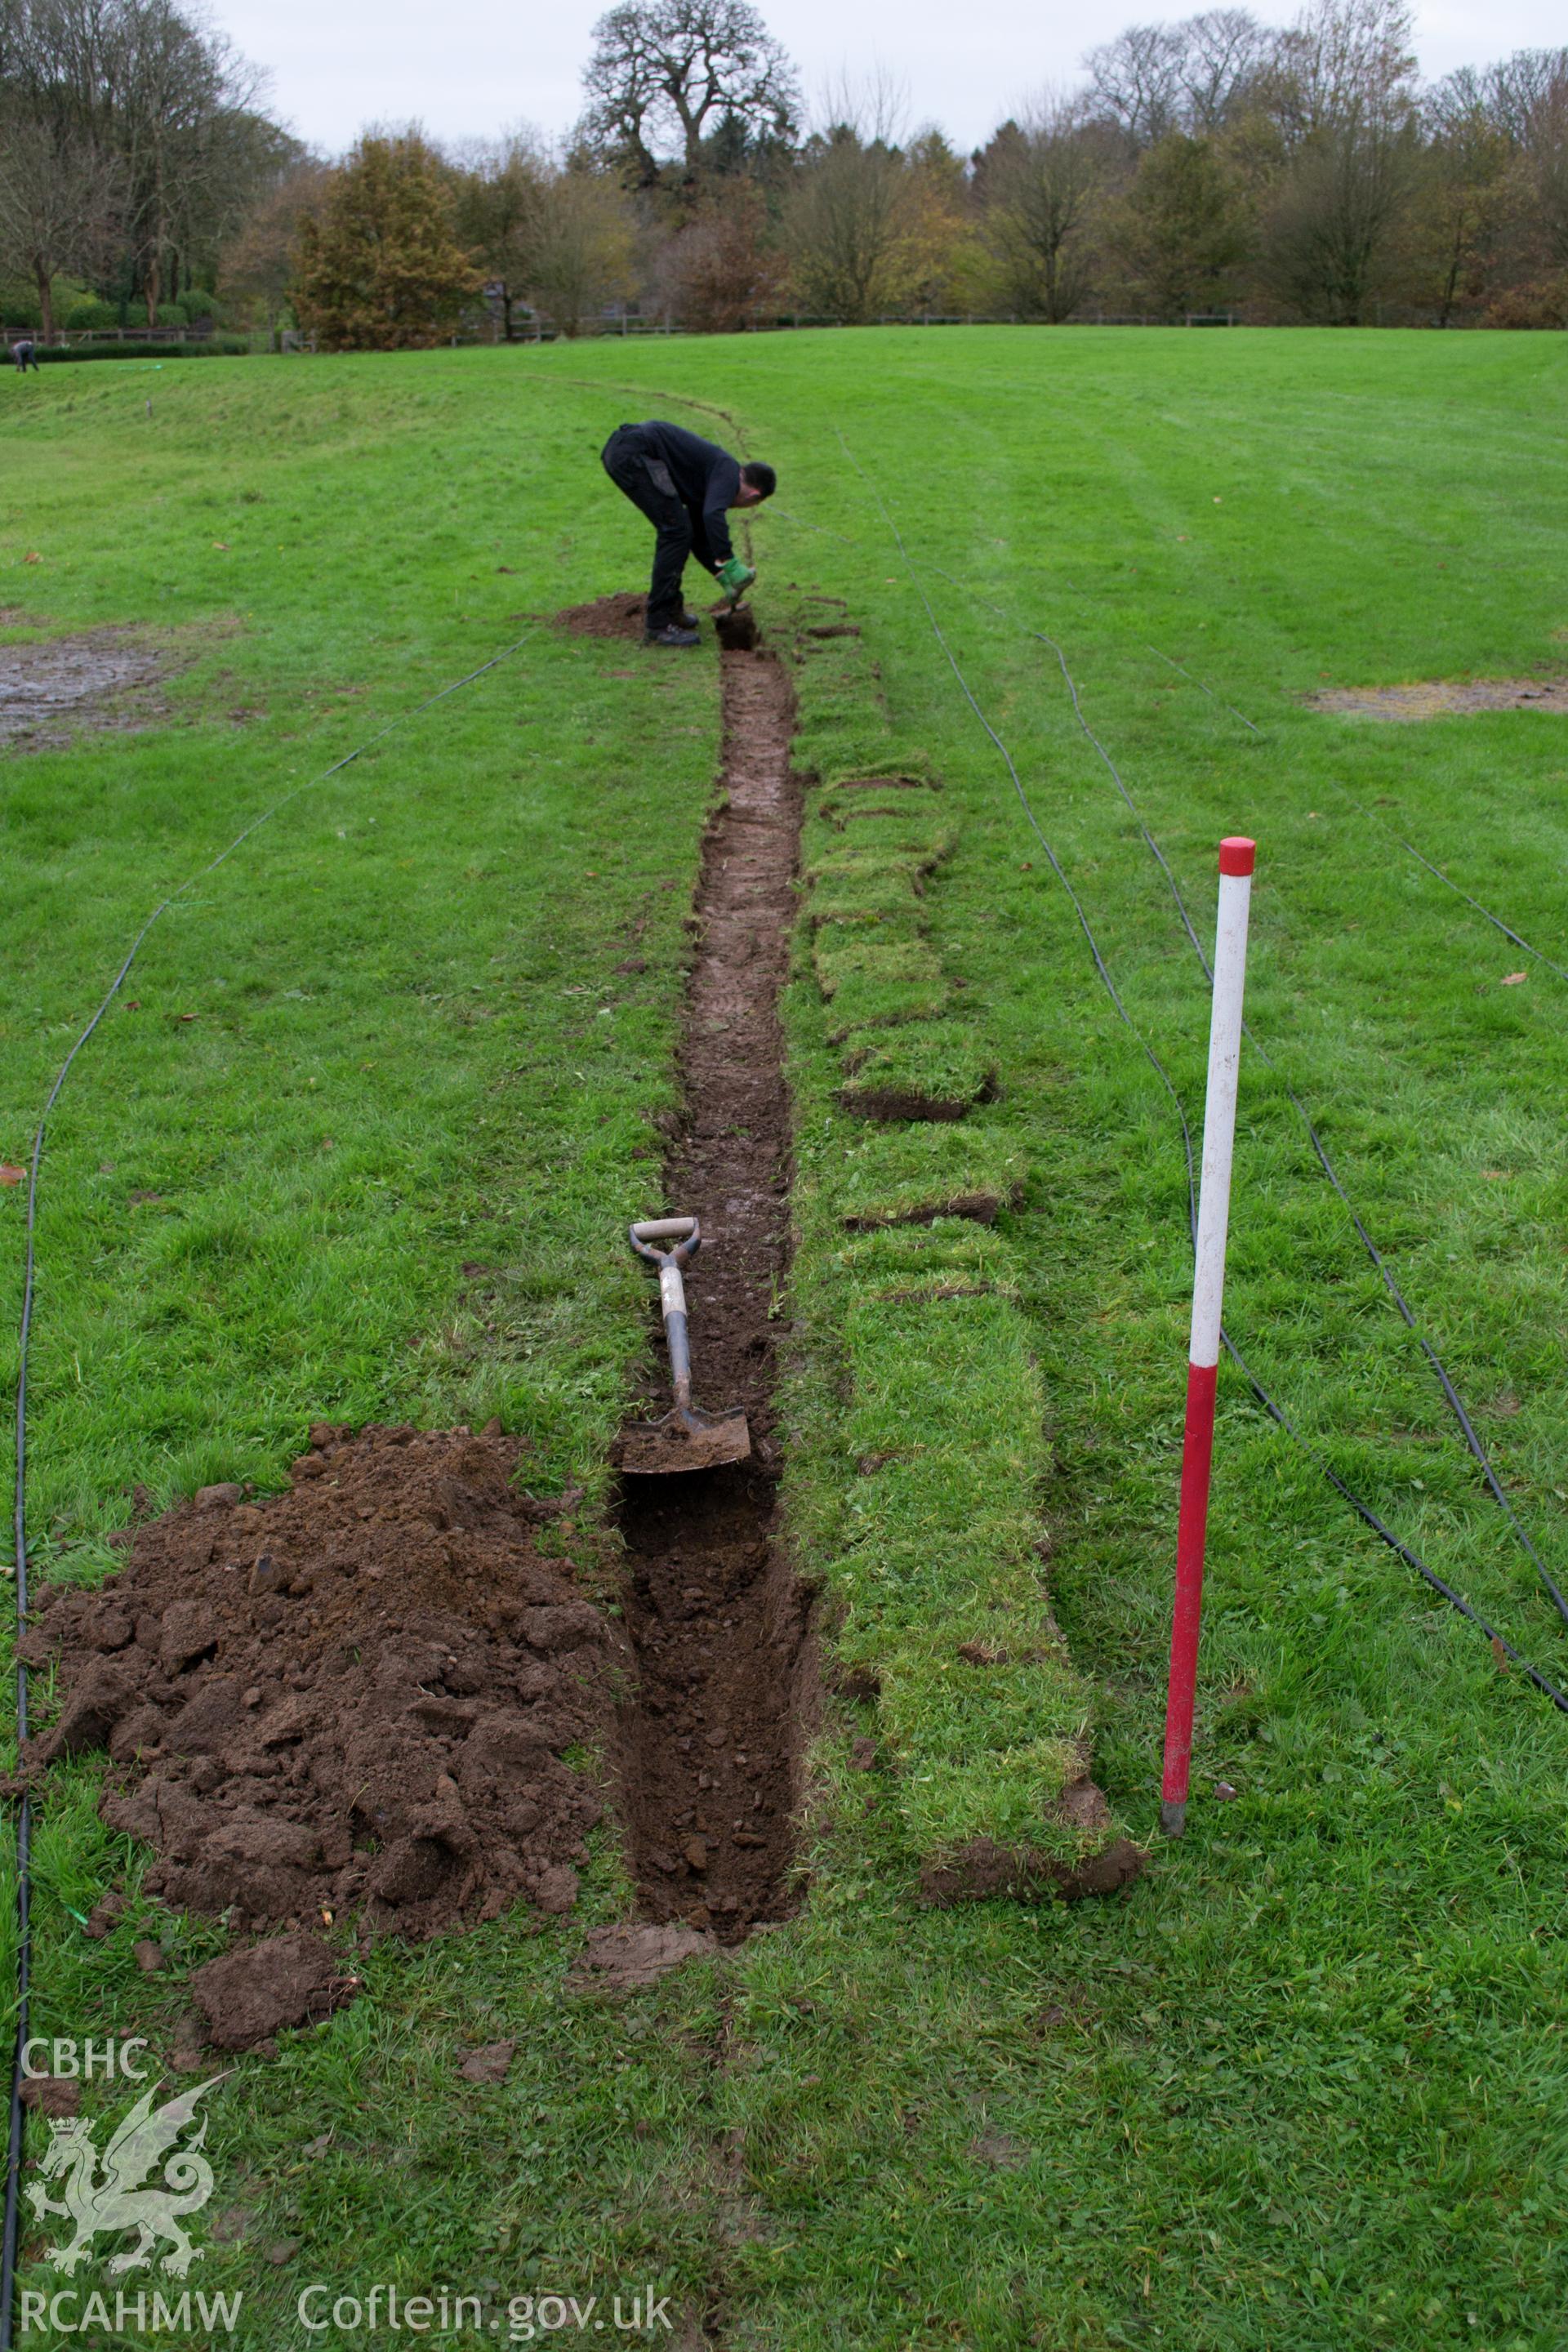 Action shot view from the east of reduction of 10m length to a 0.40m trench width. Photographed during archaeological watching brief of Plas Newydd, Ynys Mon, conducted by Gwynedd Archaeological Trust on 14th November 2017. Project no. 2542.